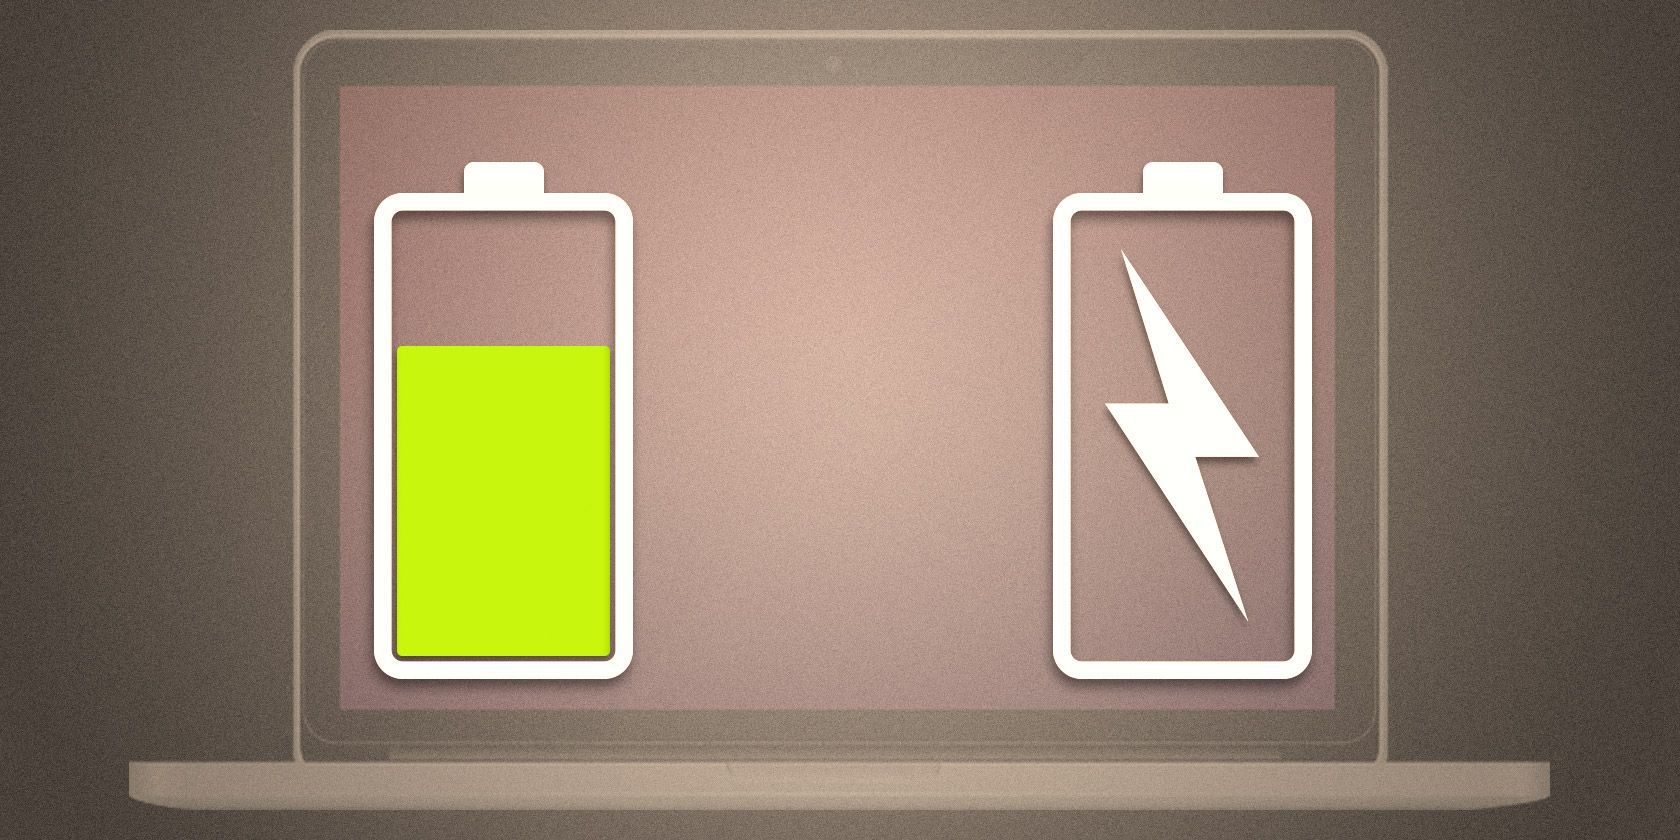 Should You Leave Your Laptop Plugged in All the Time?